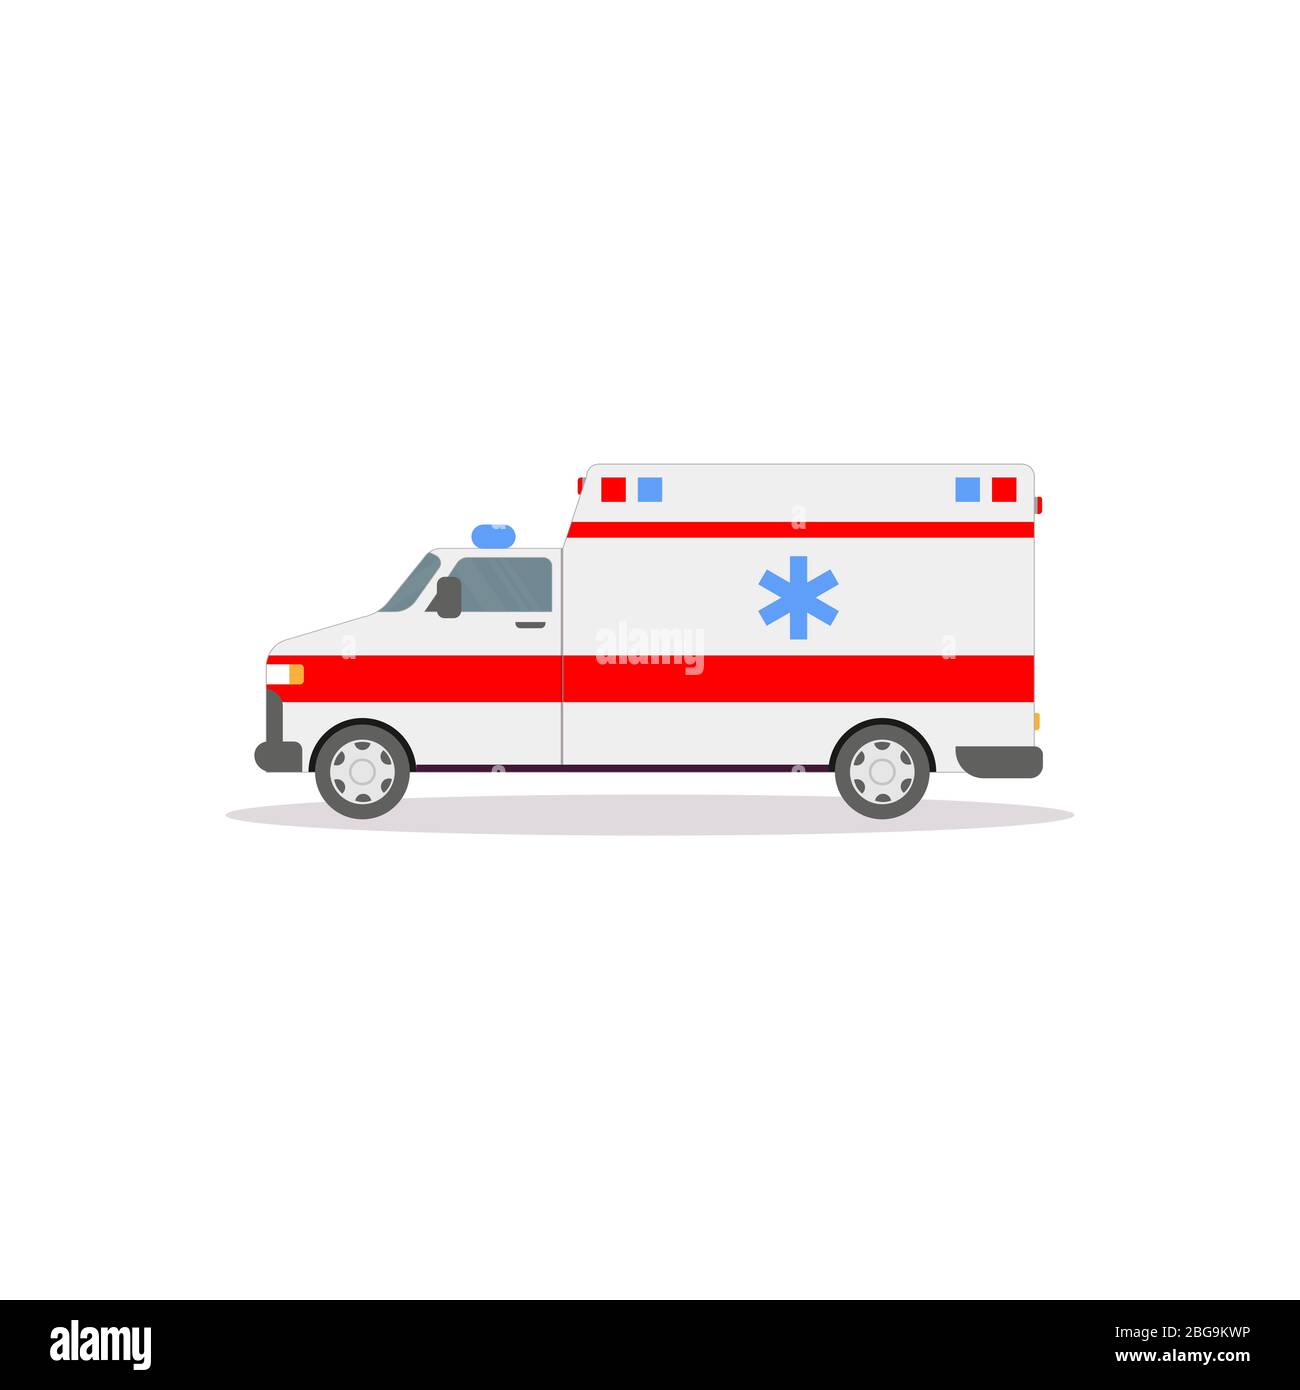 Side view of ambulance car with lights. Flat style vector illustration. Vehicle and transport banner. Modern ambulance american car. First aid van wit Stock Vector